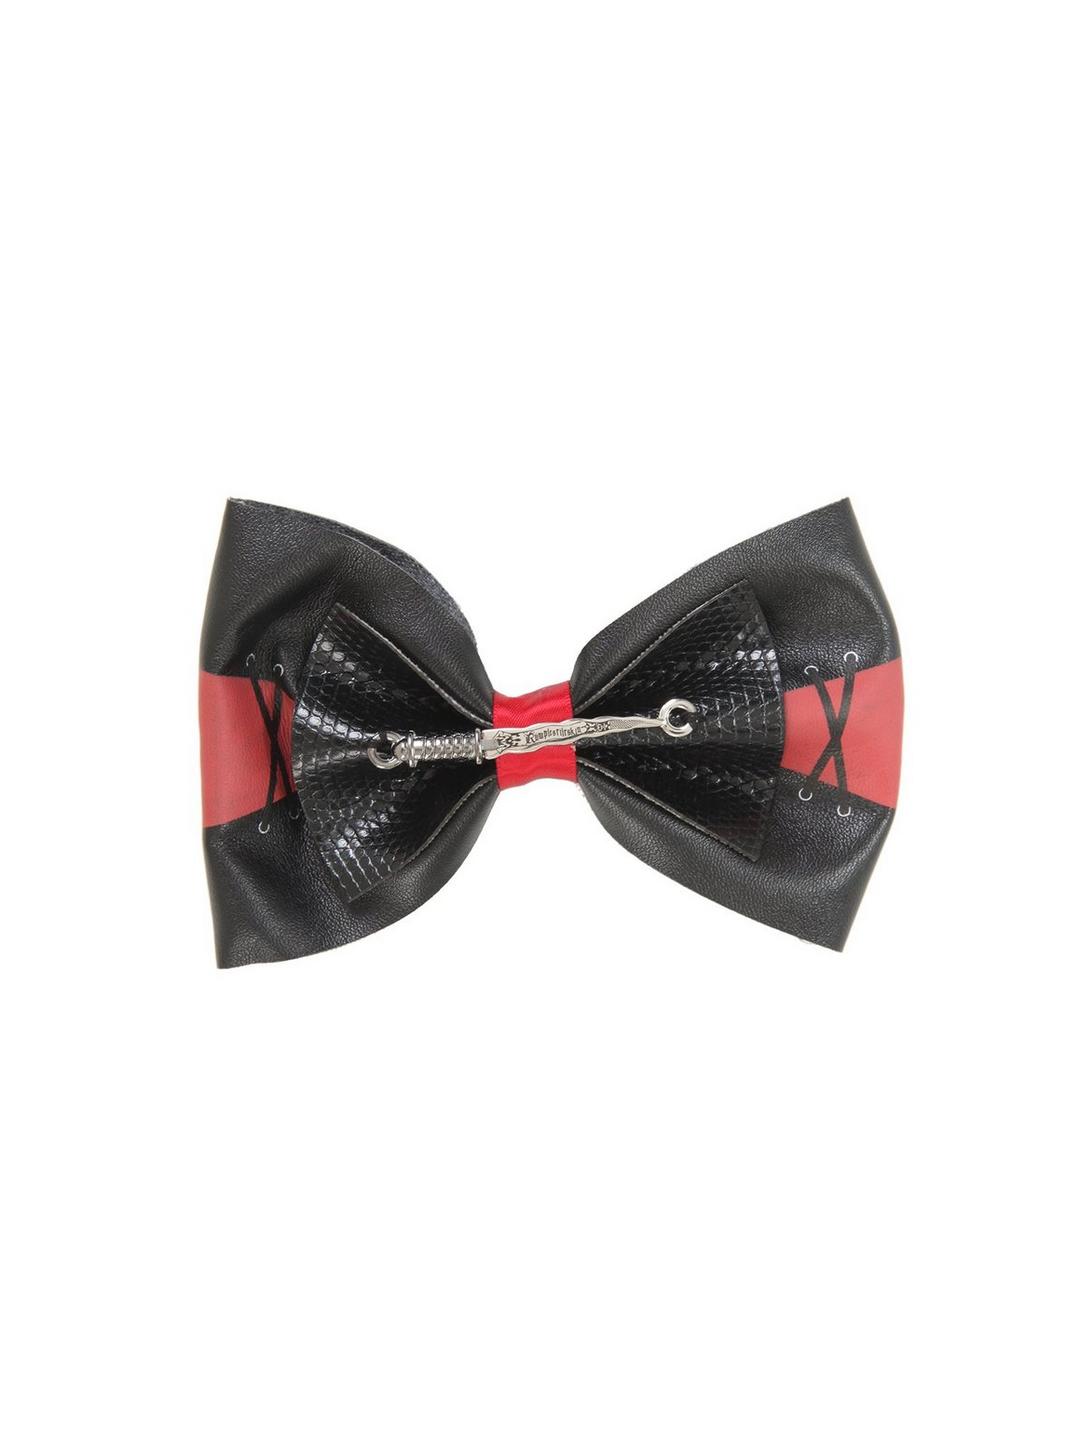 Once Upon A Time Rumplestiltskin Cosplay Hair Bow, , hi-res